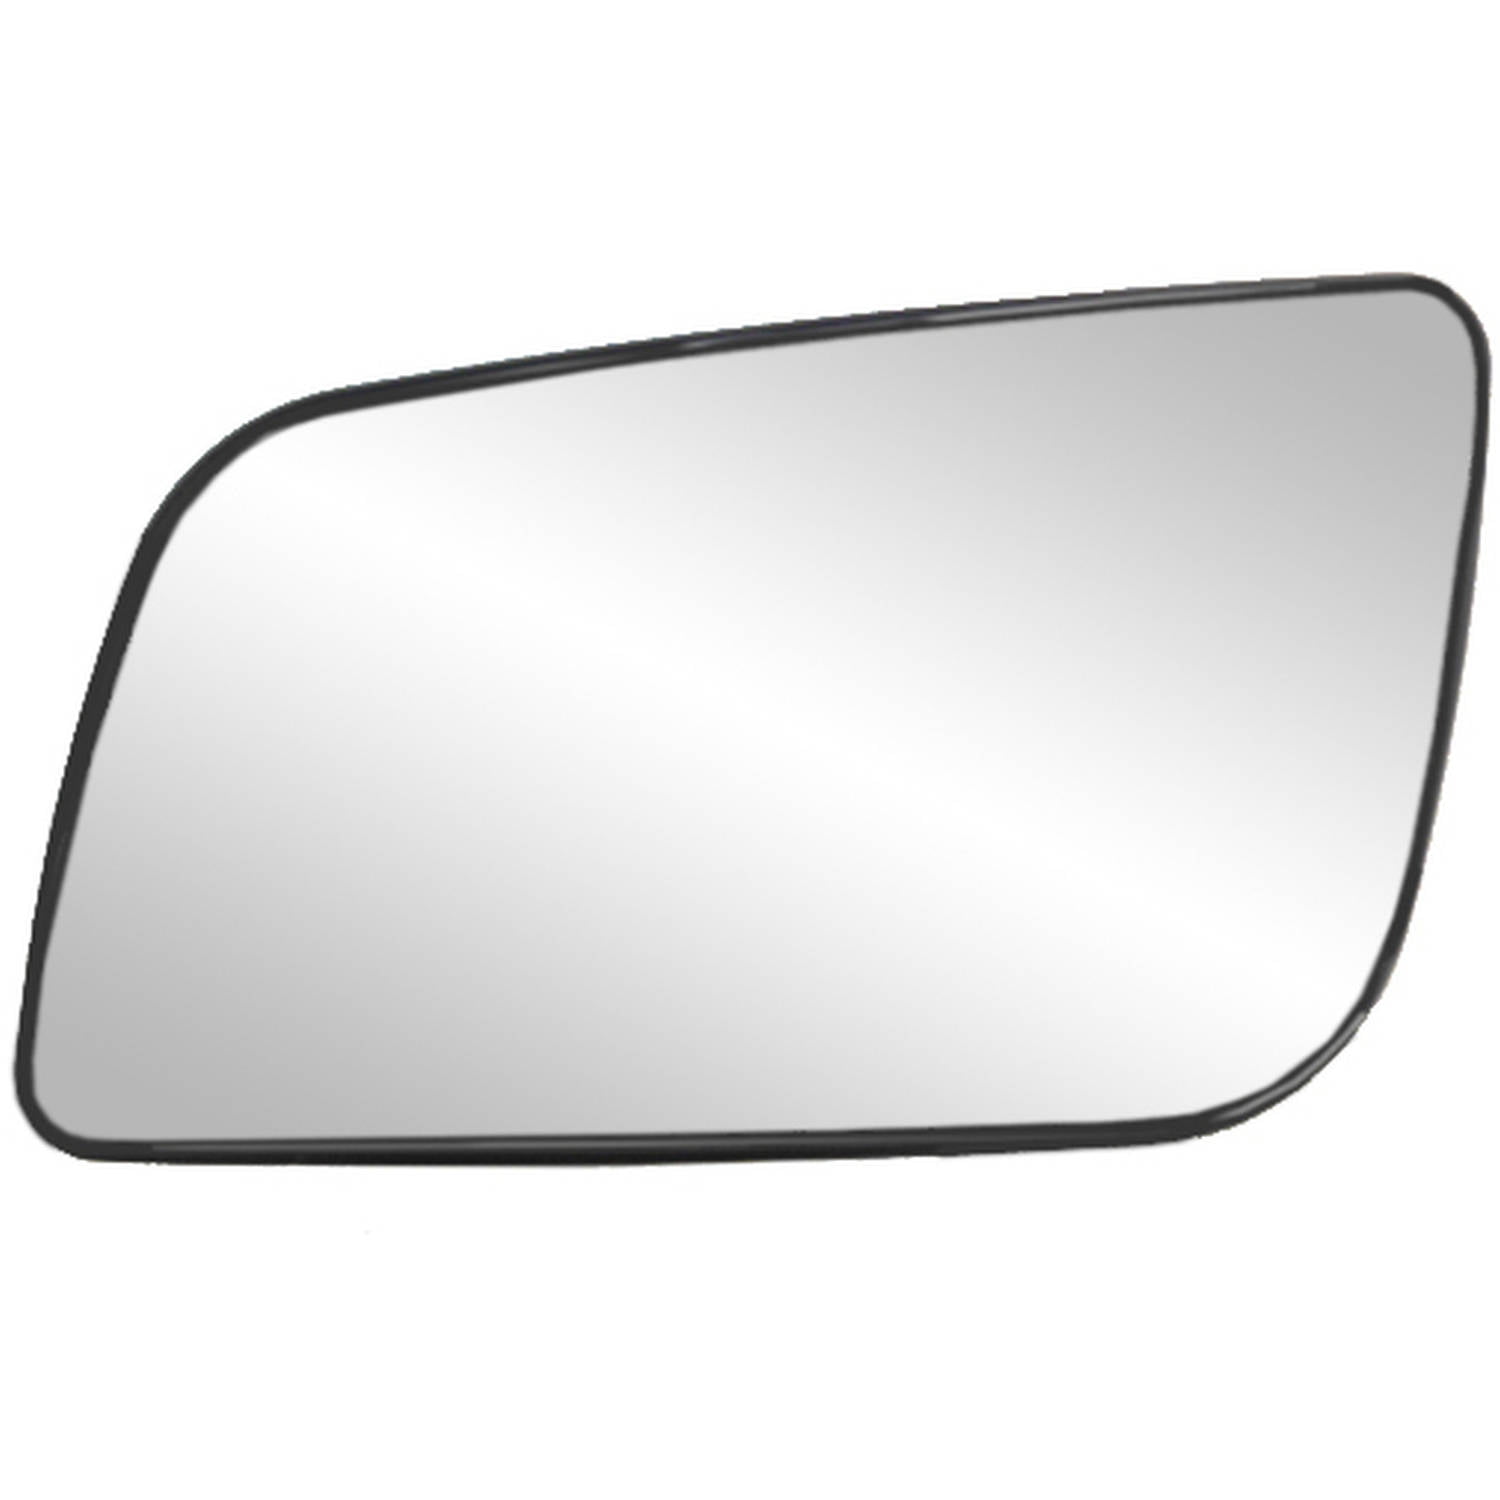 Mirror Glass and Adhesive 99-05 Chevy Astro 99-05 GMC Safari Van Driver Left Side Replacement 